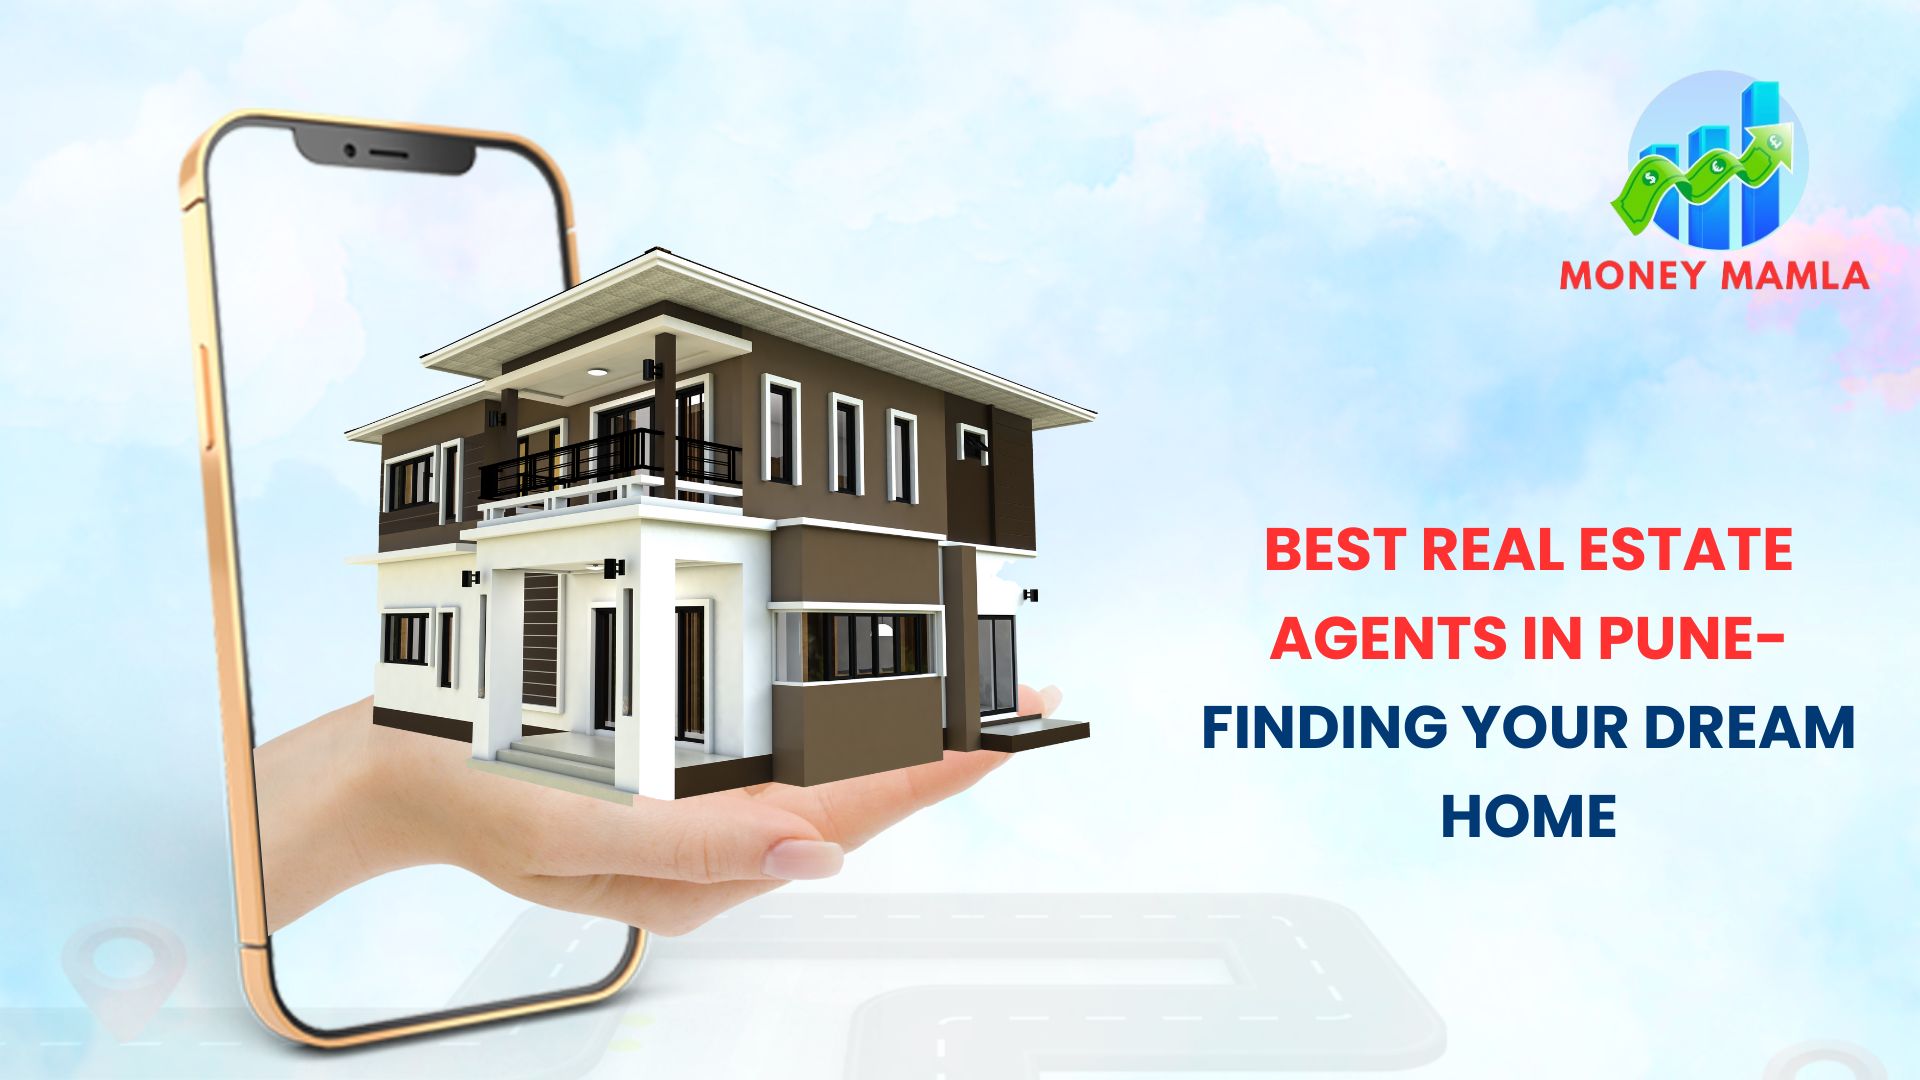 Best Real Estate Agents in Pune